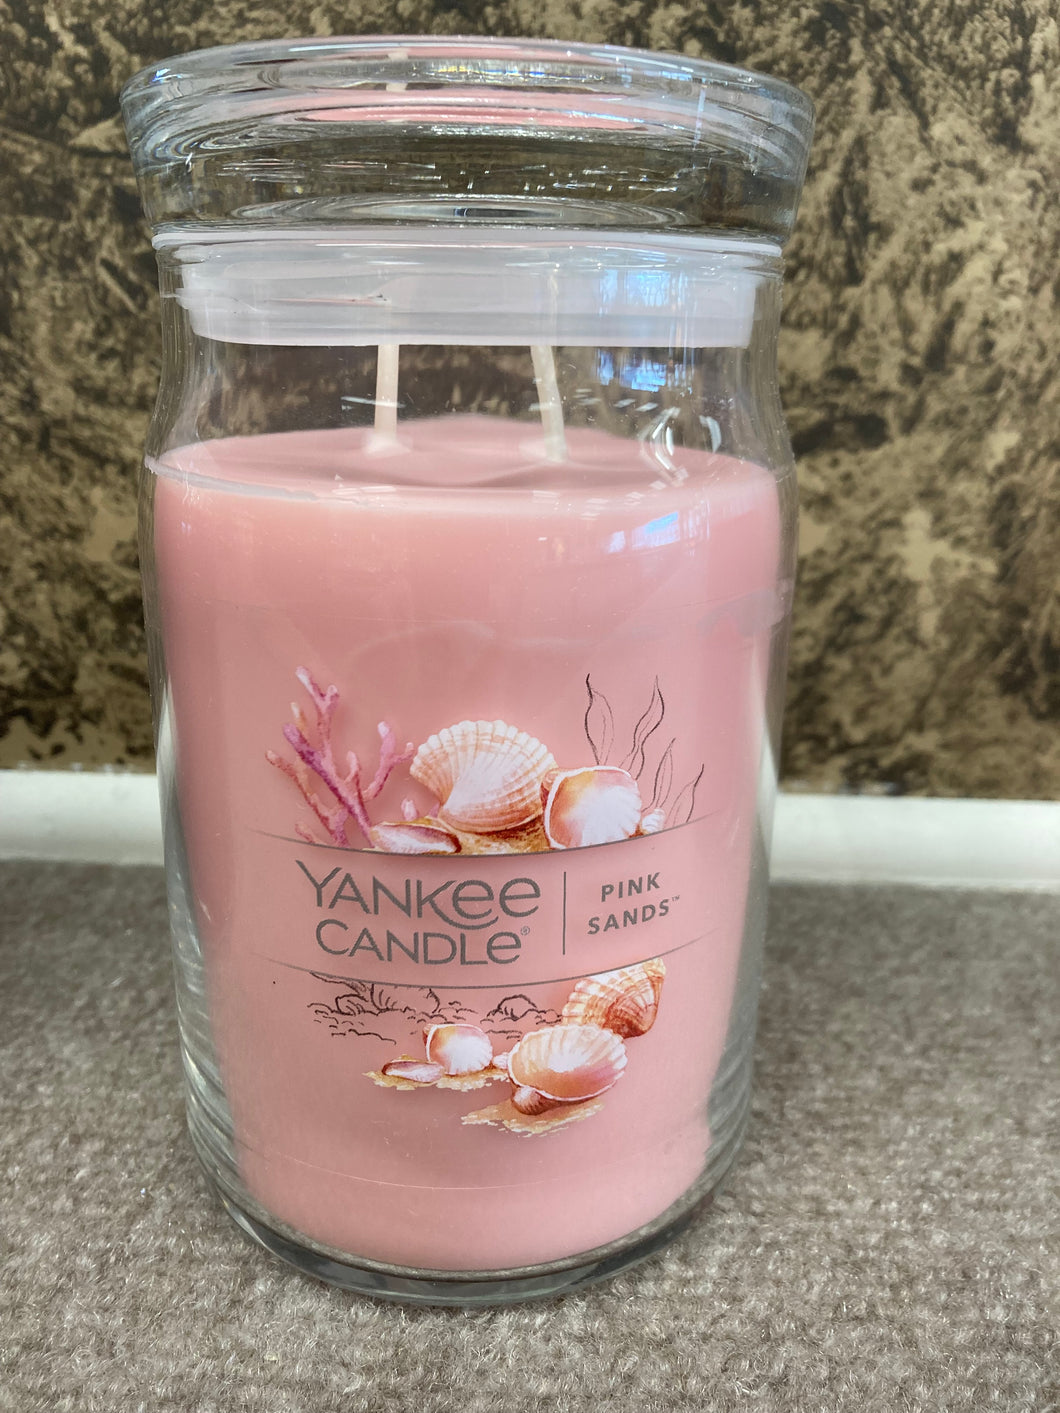 Pink Sands Large Yankee Candle – DeGrandpre Jewelers